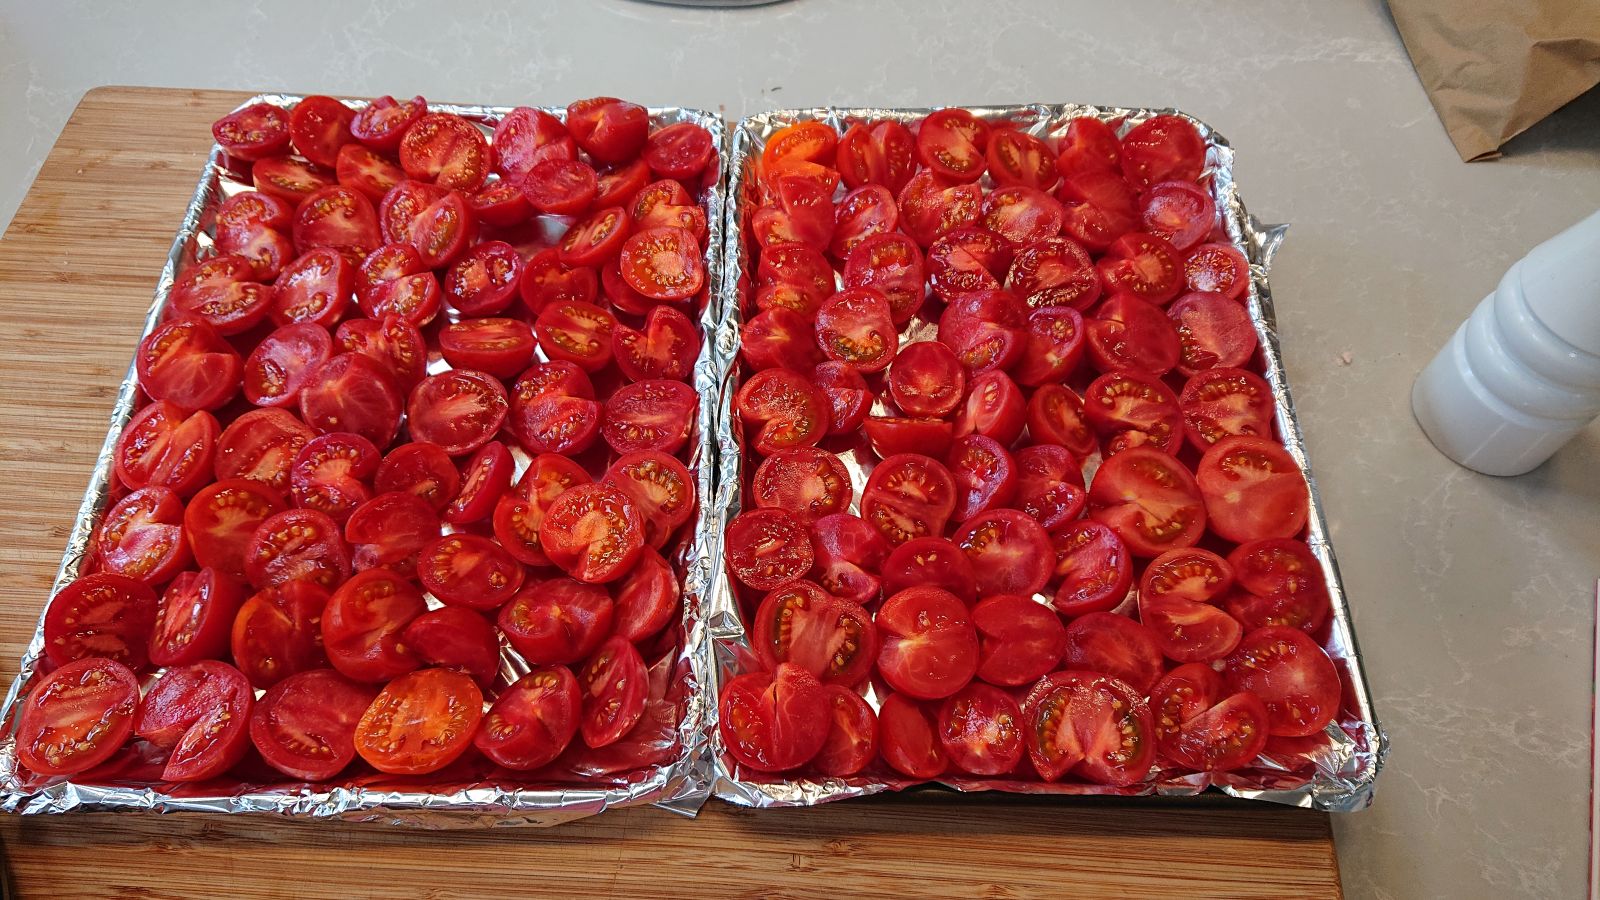 Tomatoes cut in half and placed on a baking tray